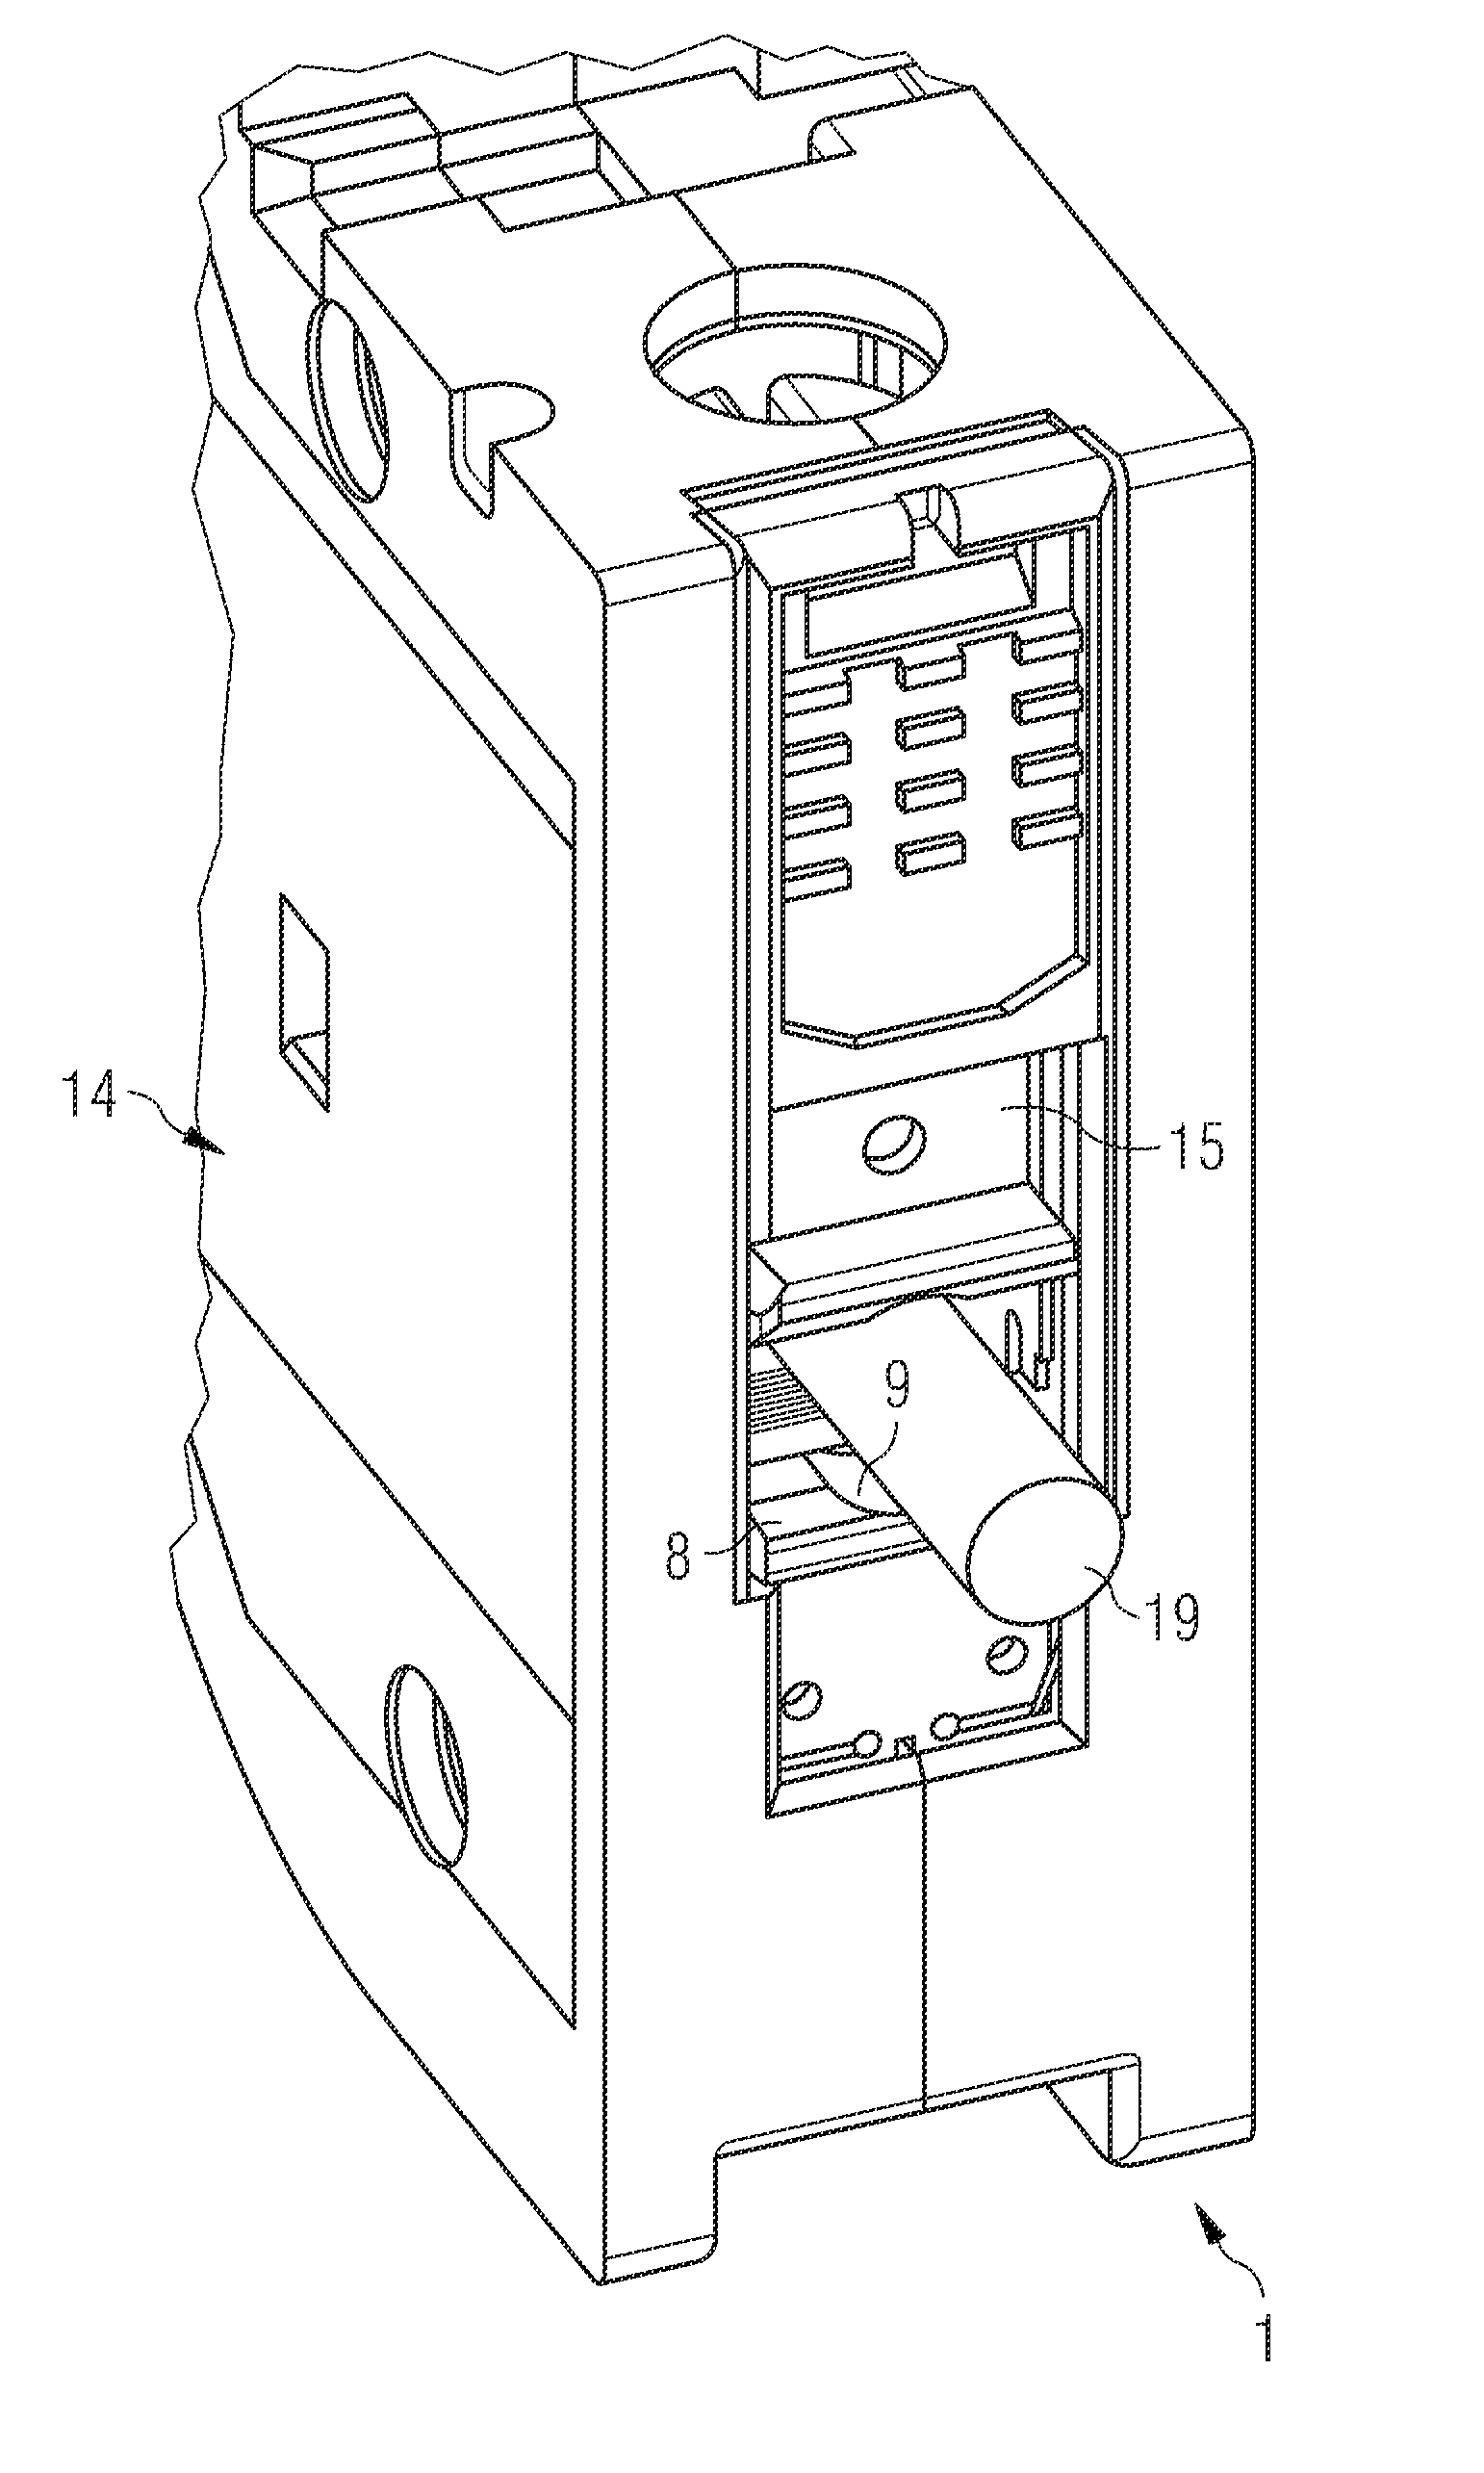 Slider device for fixing housing of electric installation device to rail, has connecting region with insulating element for covering conductive contact element of electric installation device